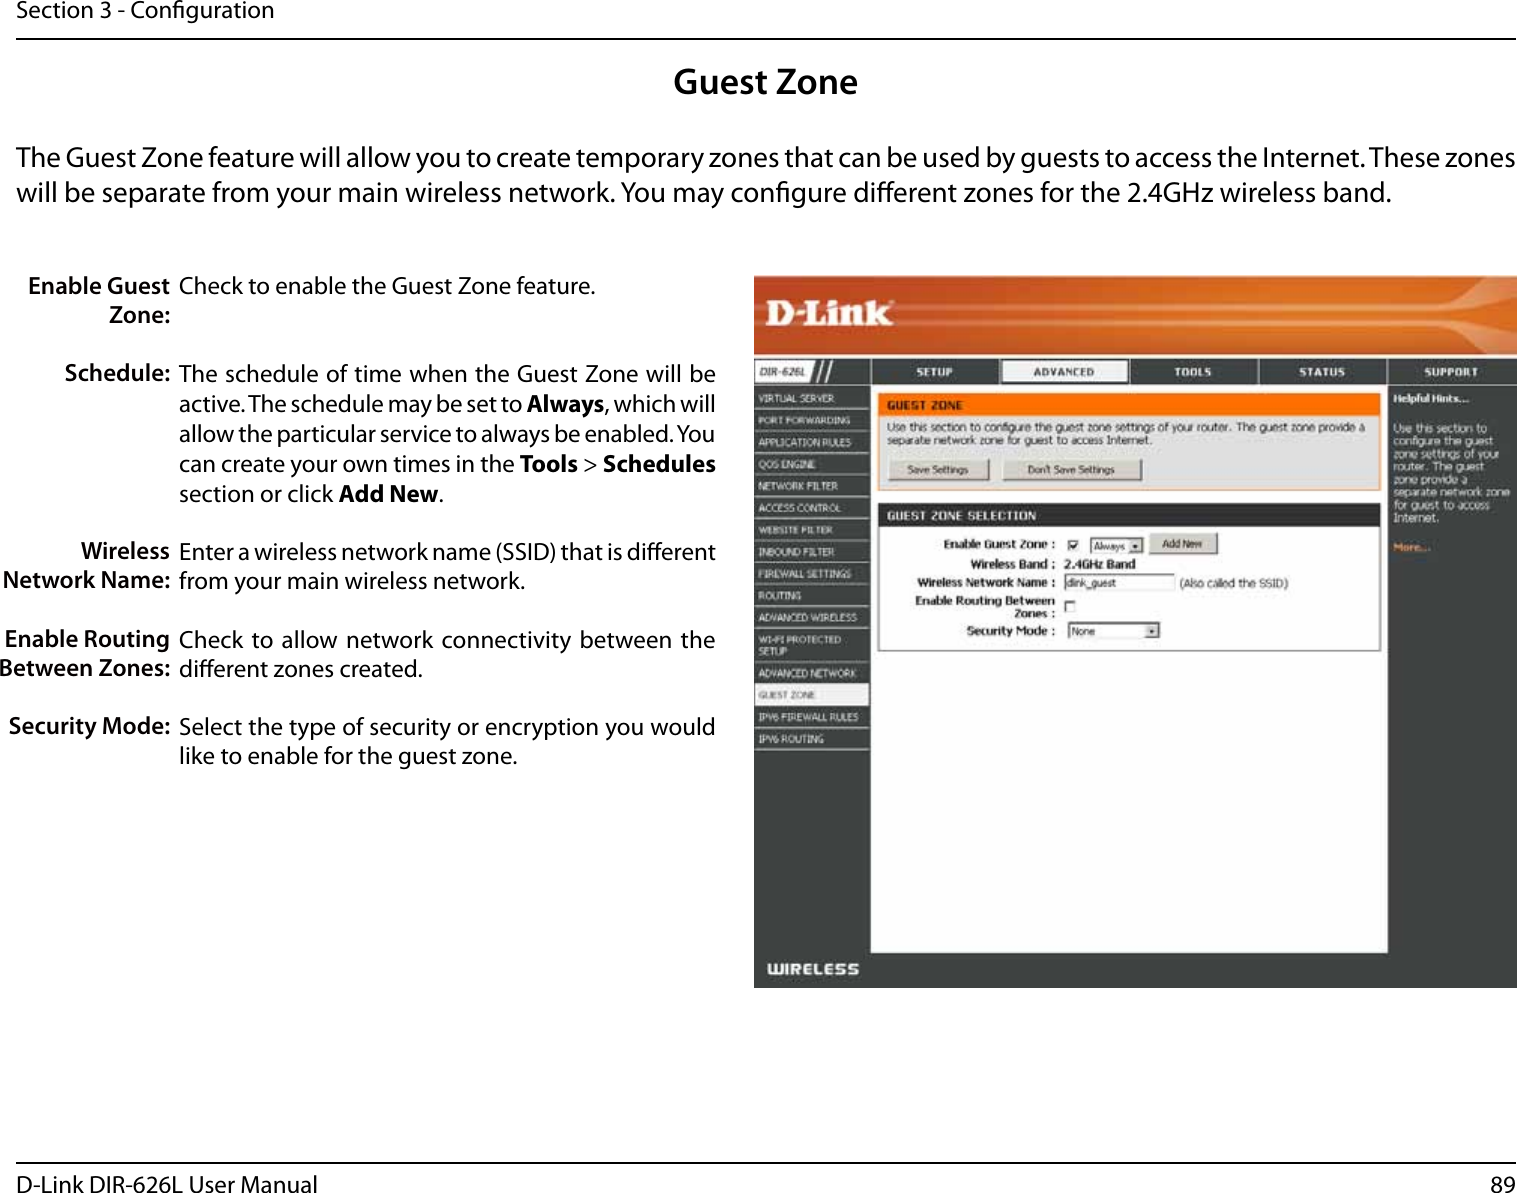 89D-Link DIR-626L User ManualSection 3 - CongurationGuest ZoneCheck to enable the Guest Zone feature. The schedule of time when the Guest Zone will be active. The schedule may be set to Always, which will allow the particular service to always be enabled. You can create your own times in the Tools &gt; Schedules section or click Add New.Enter a wireless network name (SSID) that is dierent from your main wireless network.Check to allow network connectivity  between the dierent zones created. Select the type of security or encryption you would like to enable for the guest zone.  Enable Guest Zone:Schedule:Wireless Network Name:Enable Routing Between Zones:Security Mode:The Guest Zone feature will allow you to create temporary zones that can be used by guests to access the Internet. These zones will be separate from your main wireless network. You may congure dierent zones for the 2.4GHz wireless band.